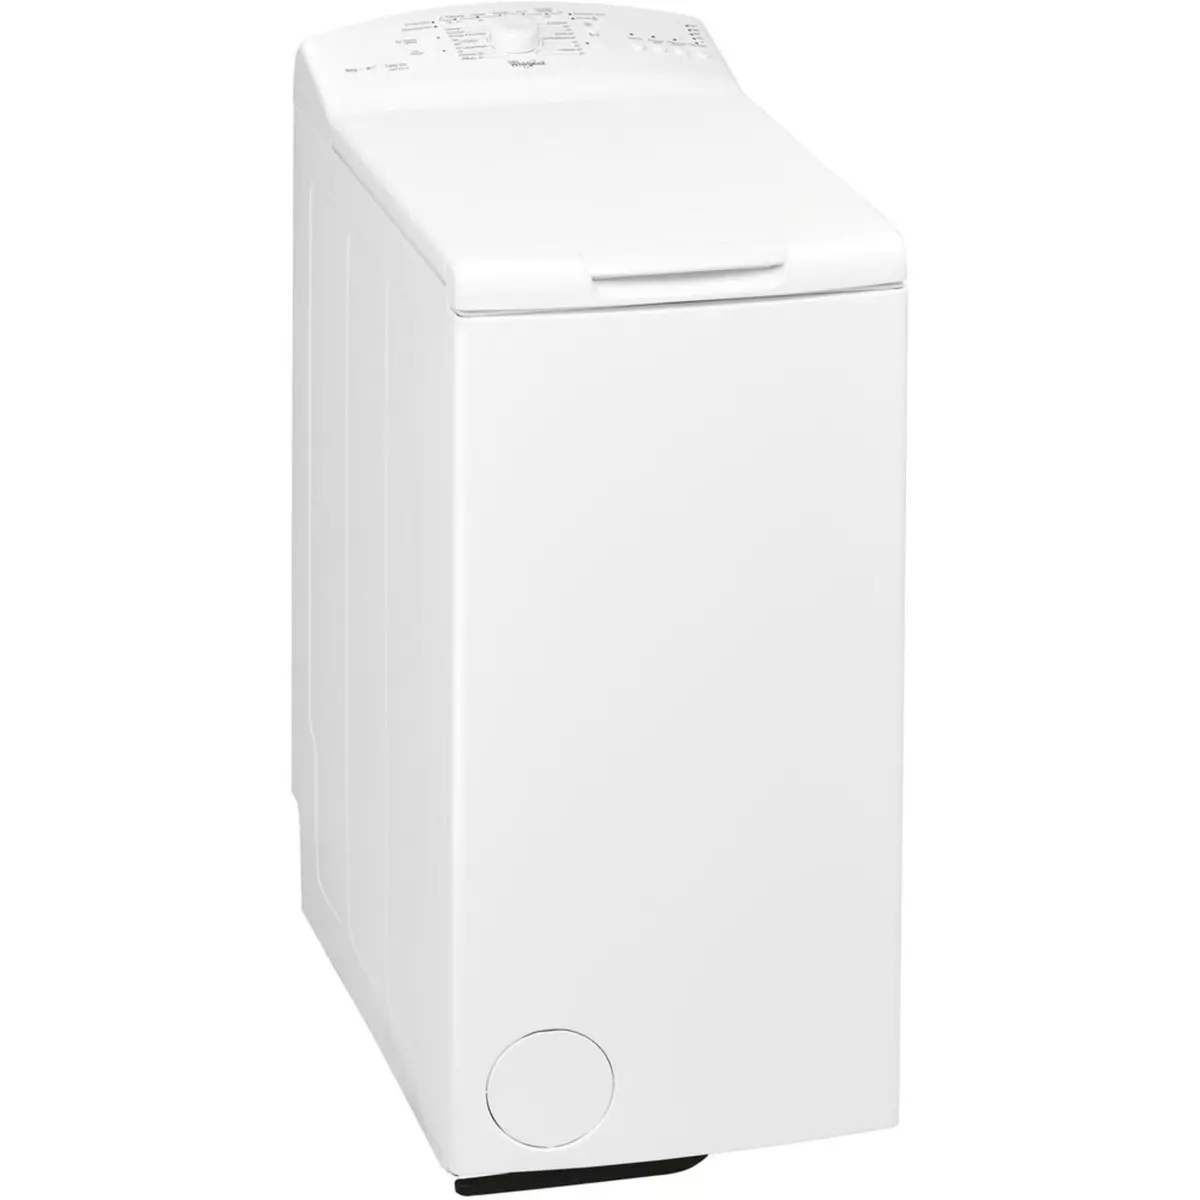 WHIRLPOOL Lave linge top AWE5213, 5 Kg, 1200 T/min